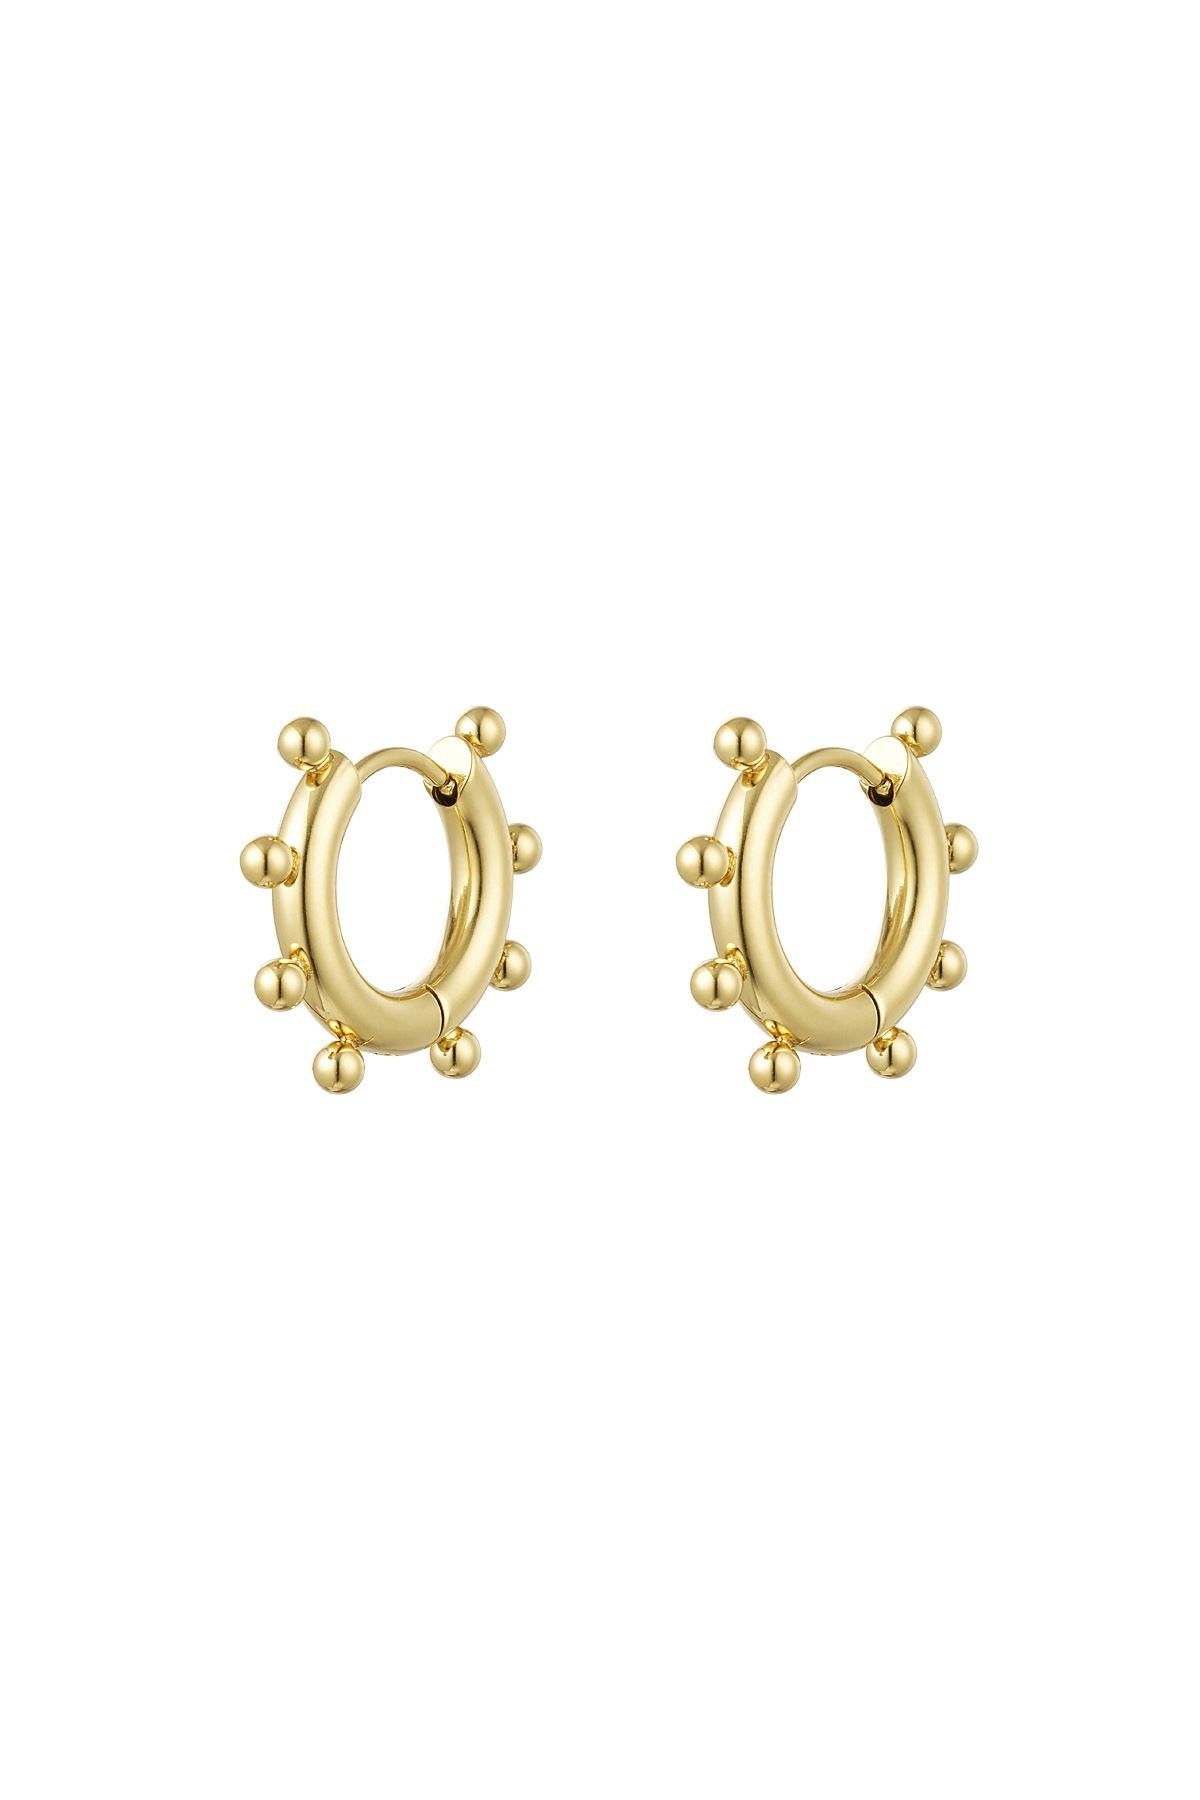 Earrings round balls small - gold Stainless Steel